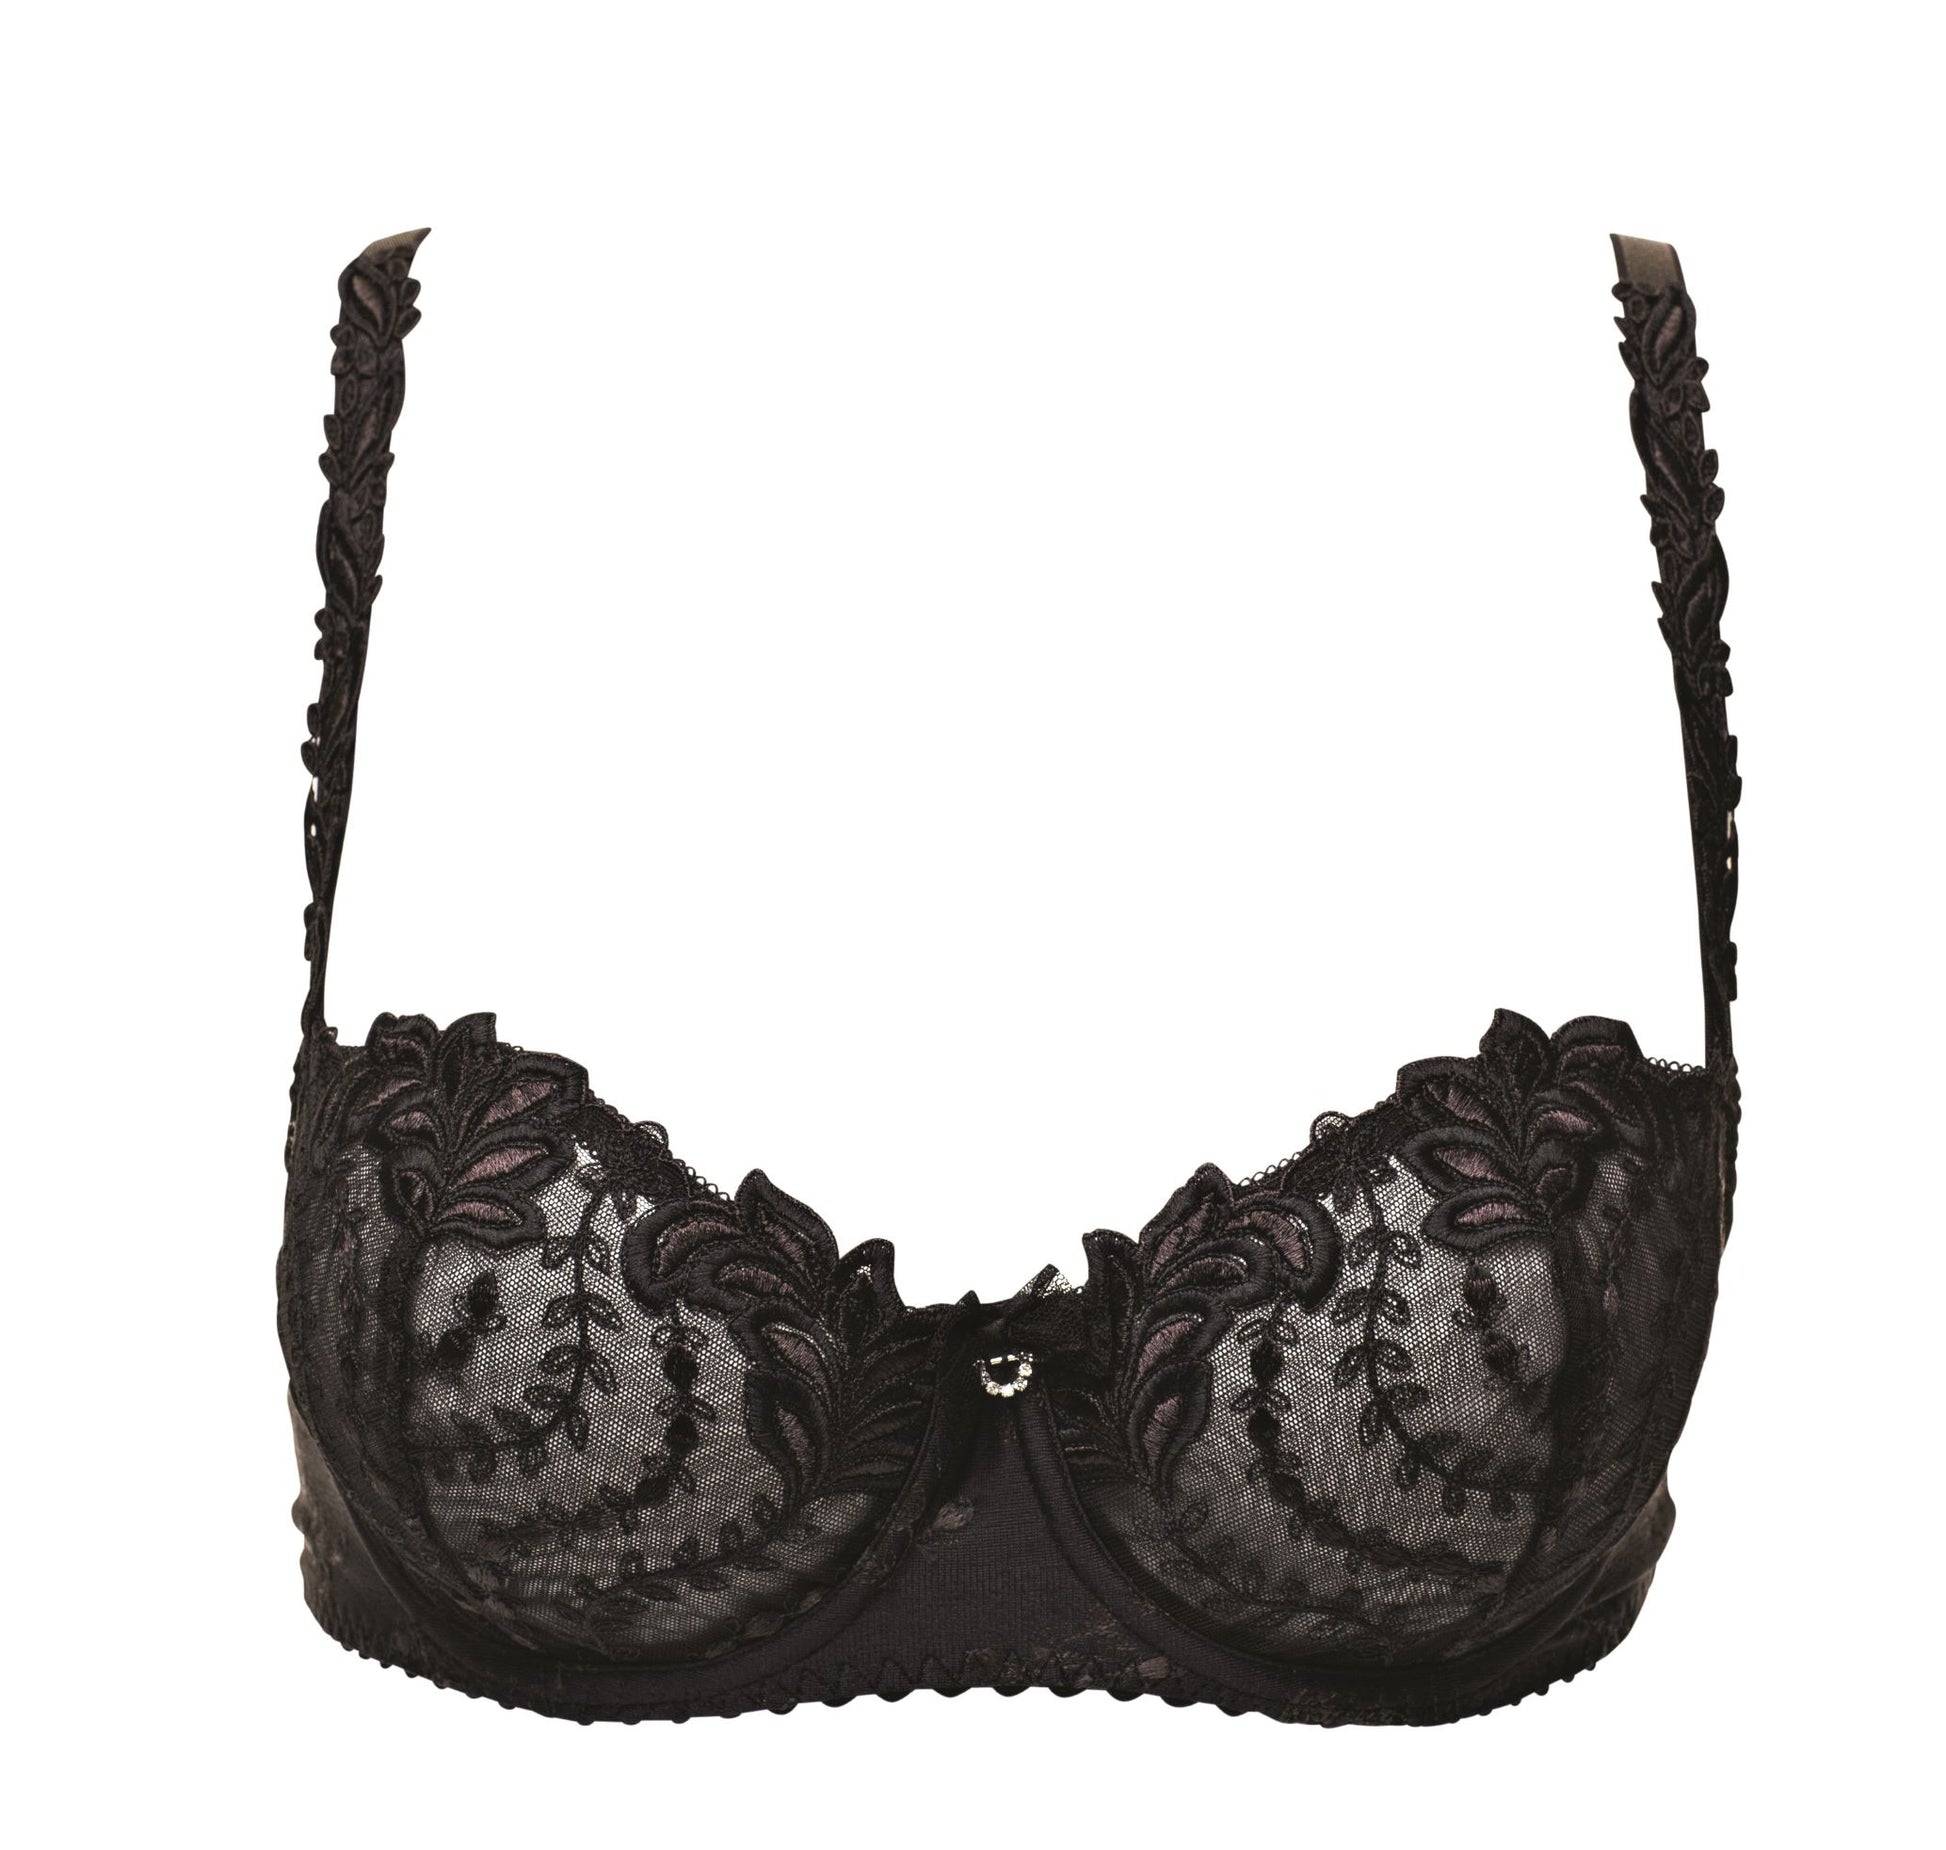 Embellished with a detailed flower embroidery, the Balconette Bra from Louisa Bracq's Lys Royal line boasts a combination of garlands of small leaves and sheer tulle for a subtle, sensuous style. 